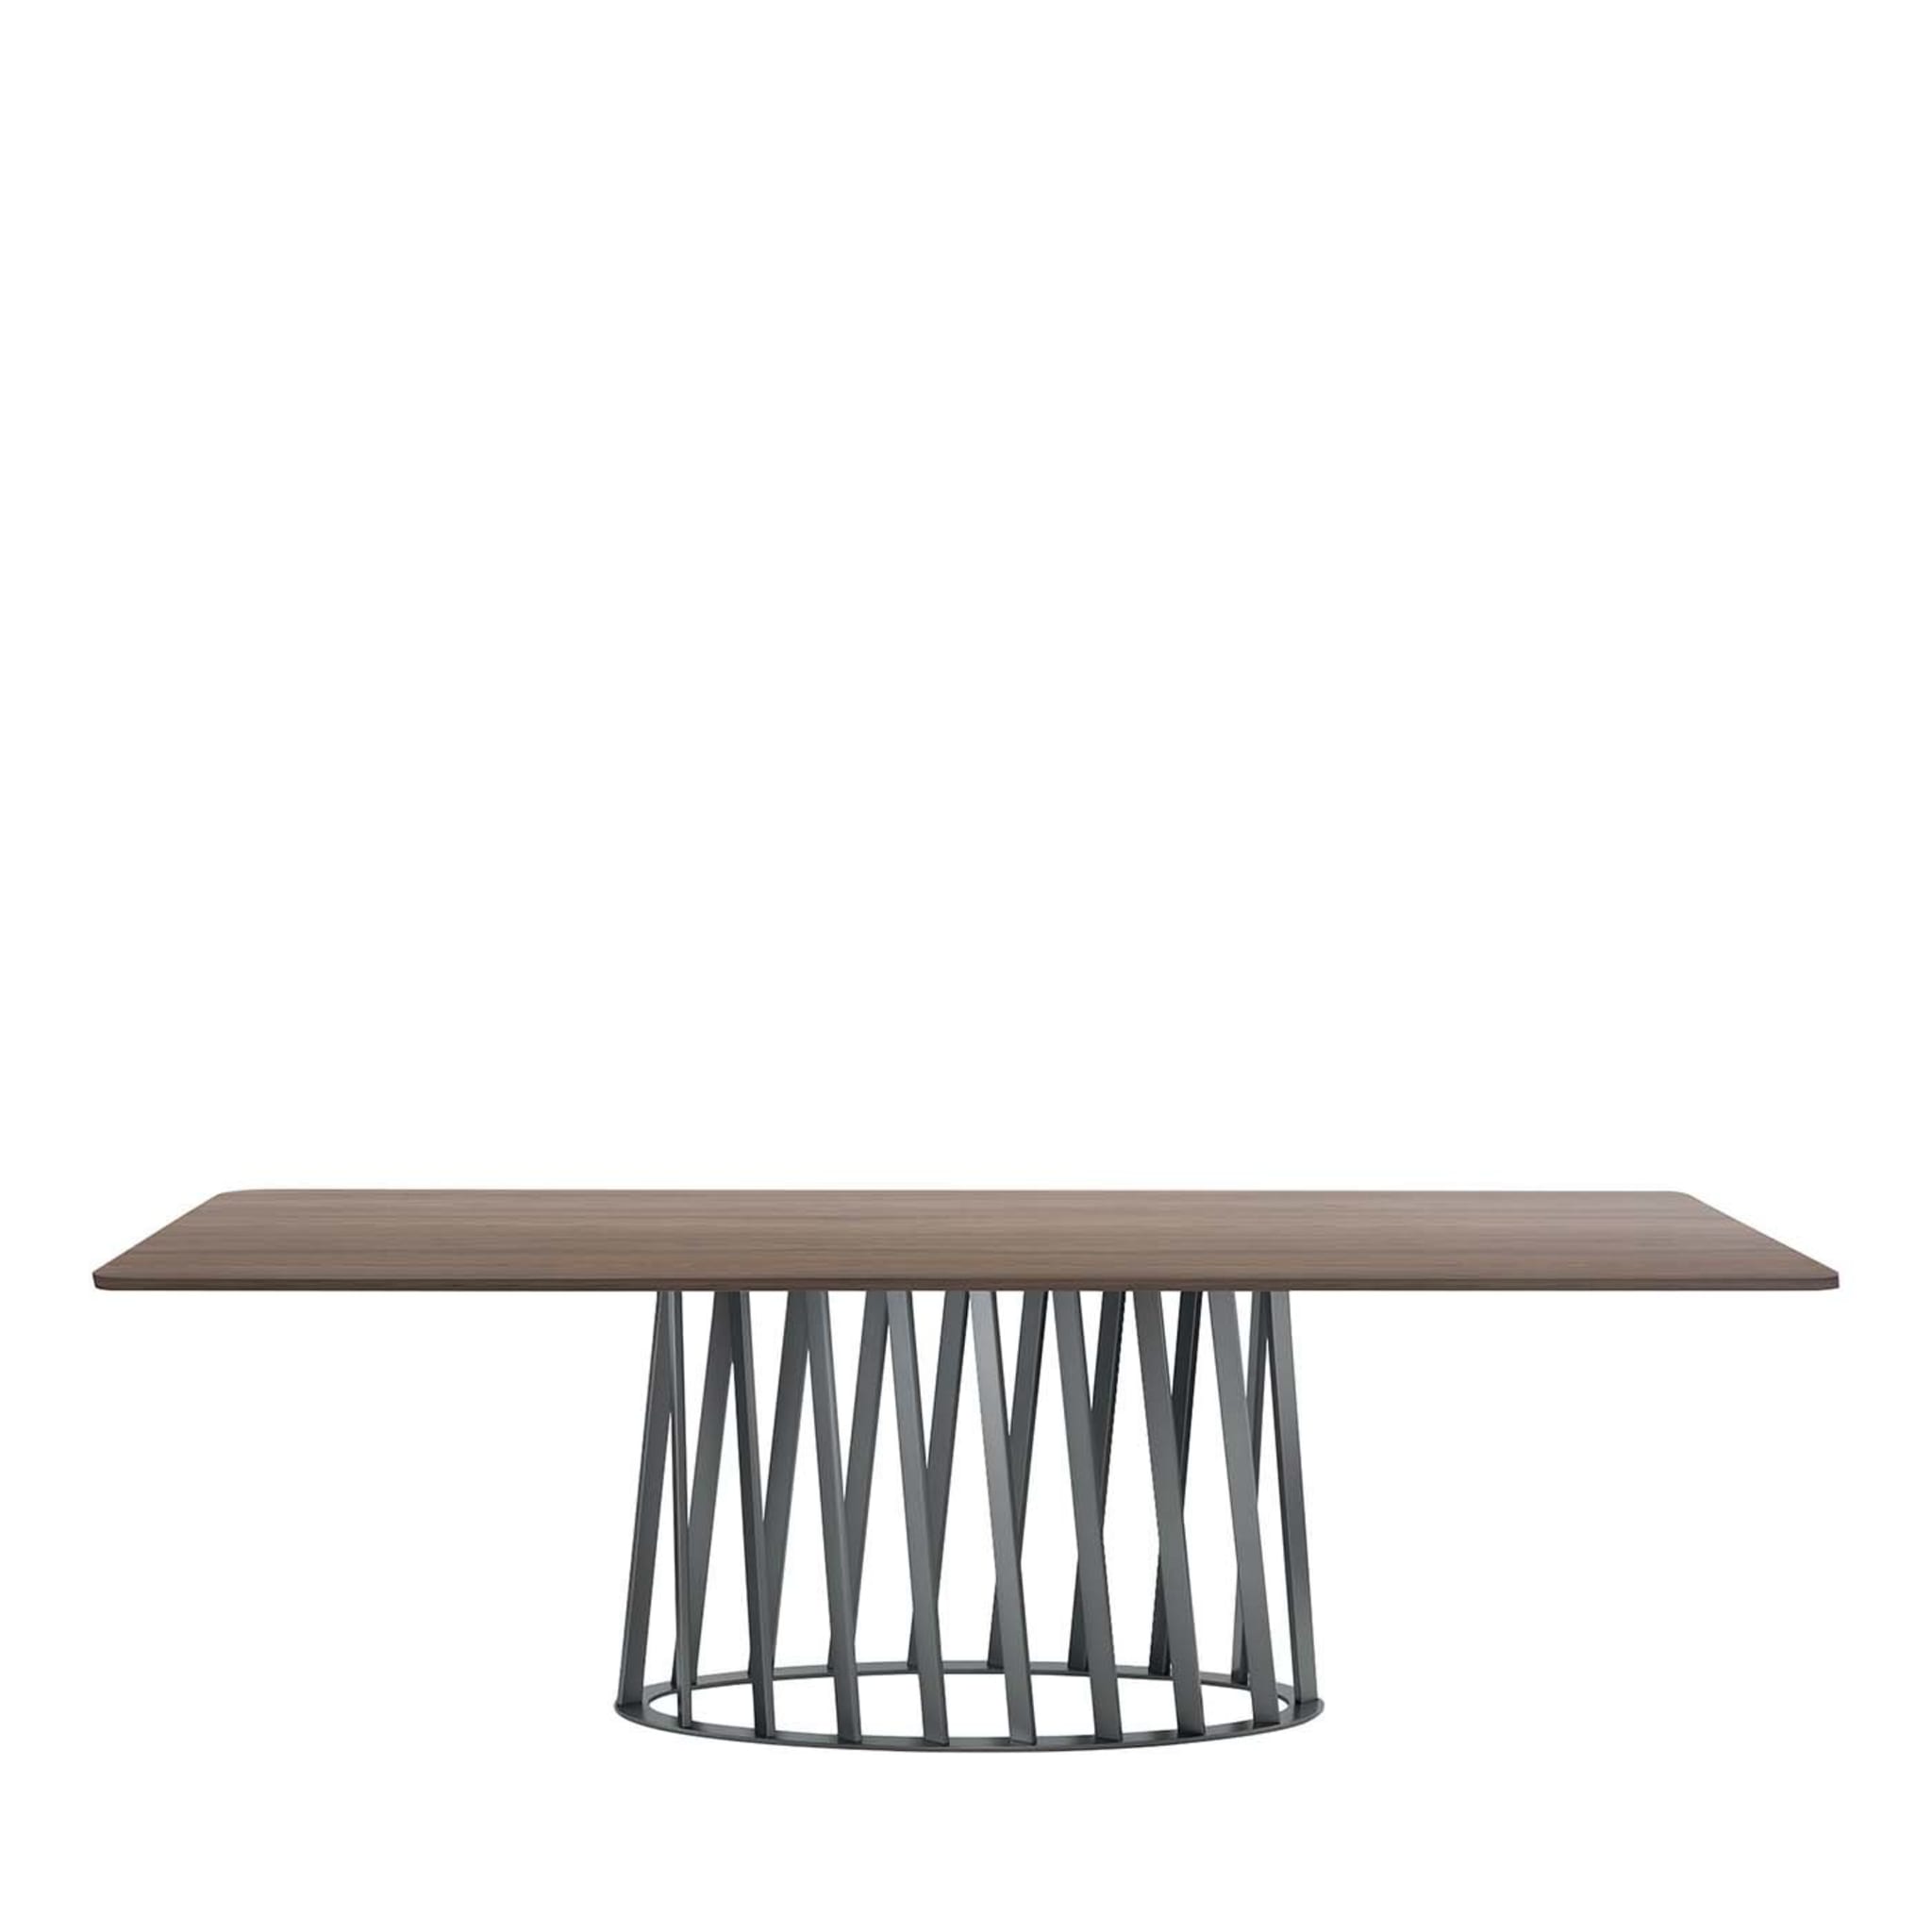 Cosmo Table by Cesare Arosio - Main view